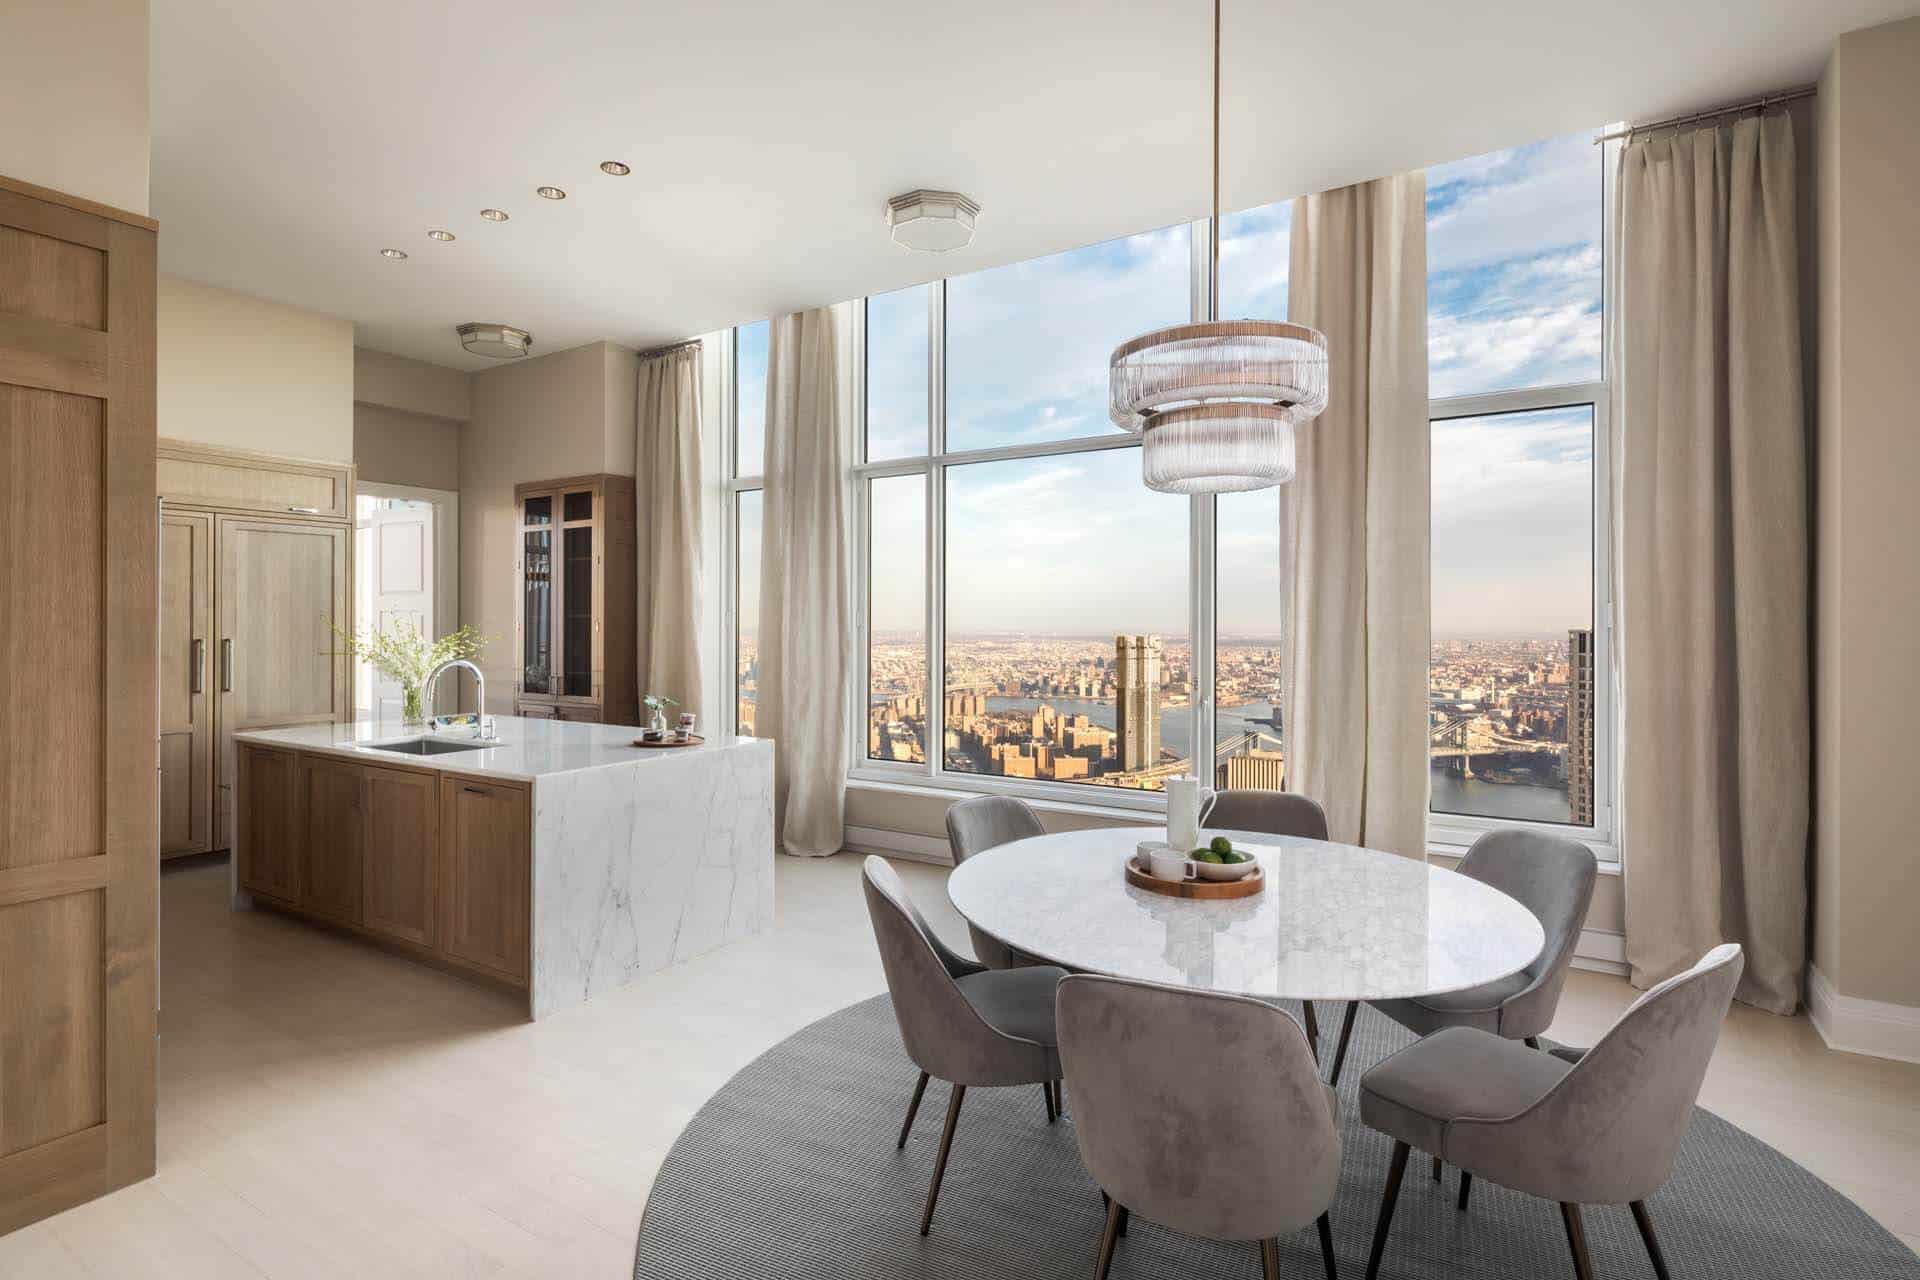 Multi-unit residential kitchen condo features NYC skyline view, Bilotta Collection cabinetry and marble-topped island with waterfall.